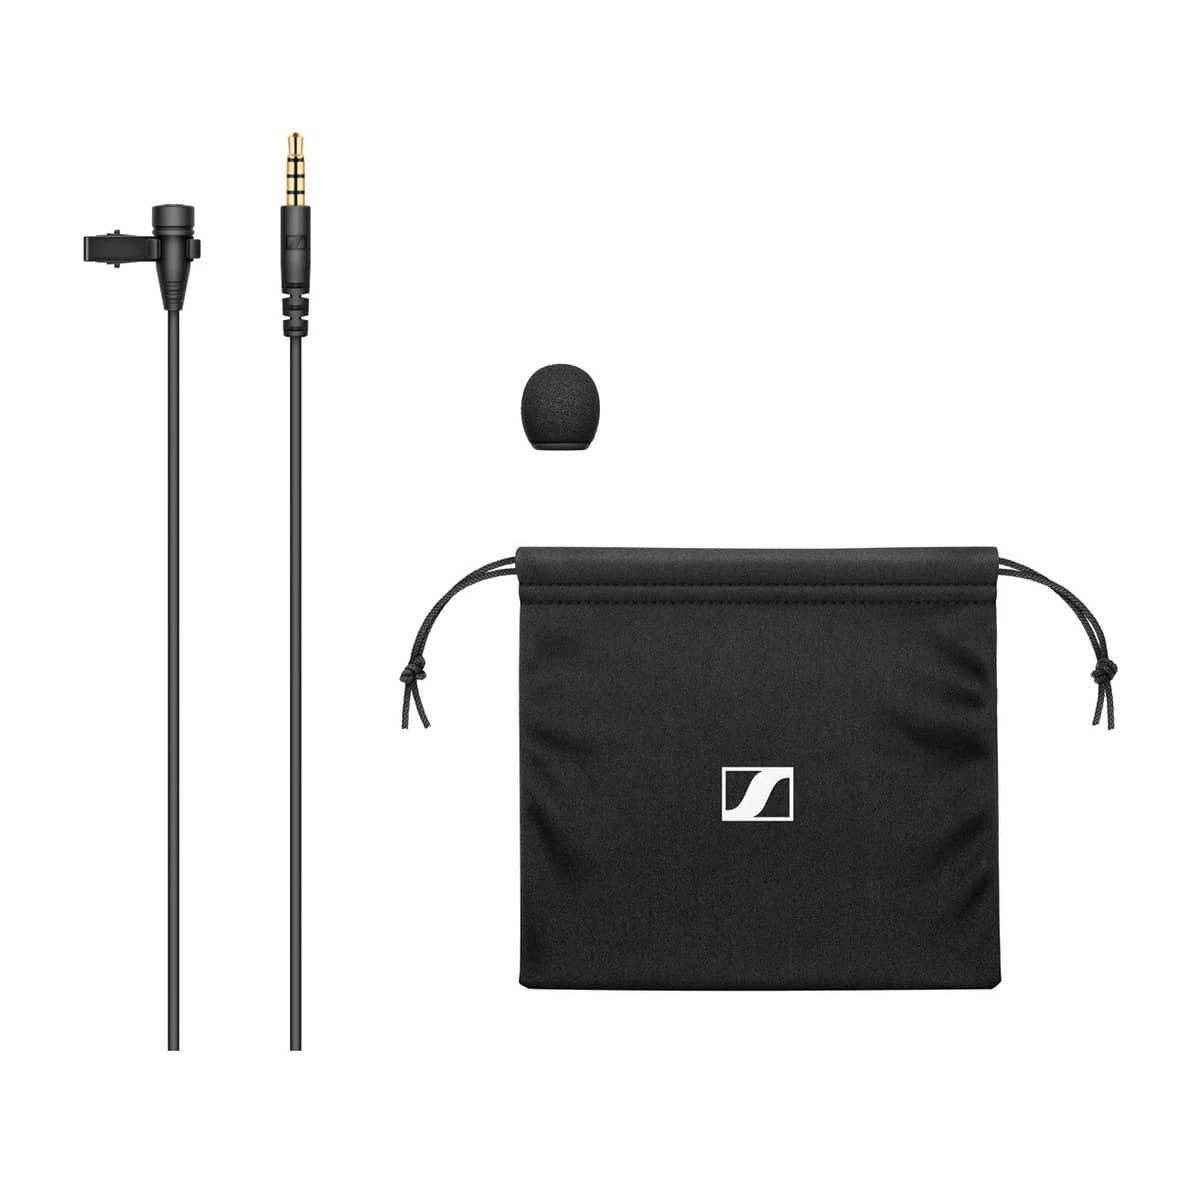 Sennheiser XS Lav Mobile Omnidirectional Lavalier Microphone with 3.5mm TRRS Connector